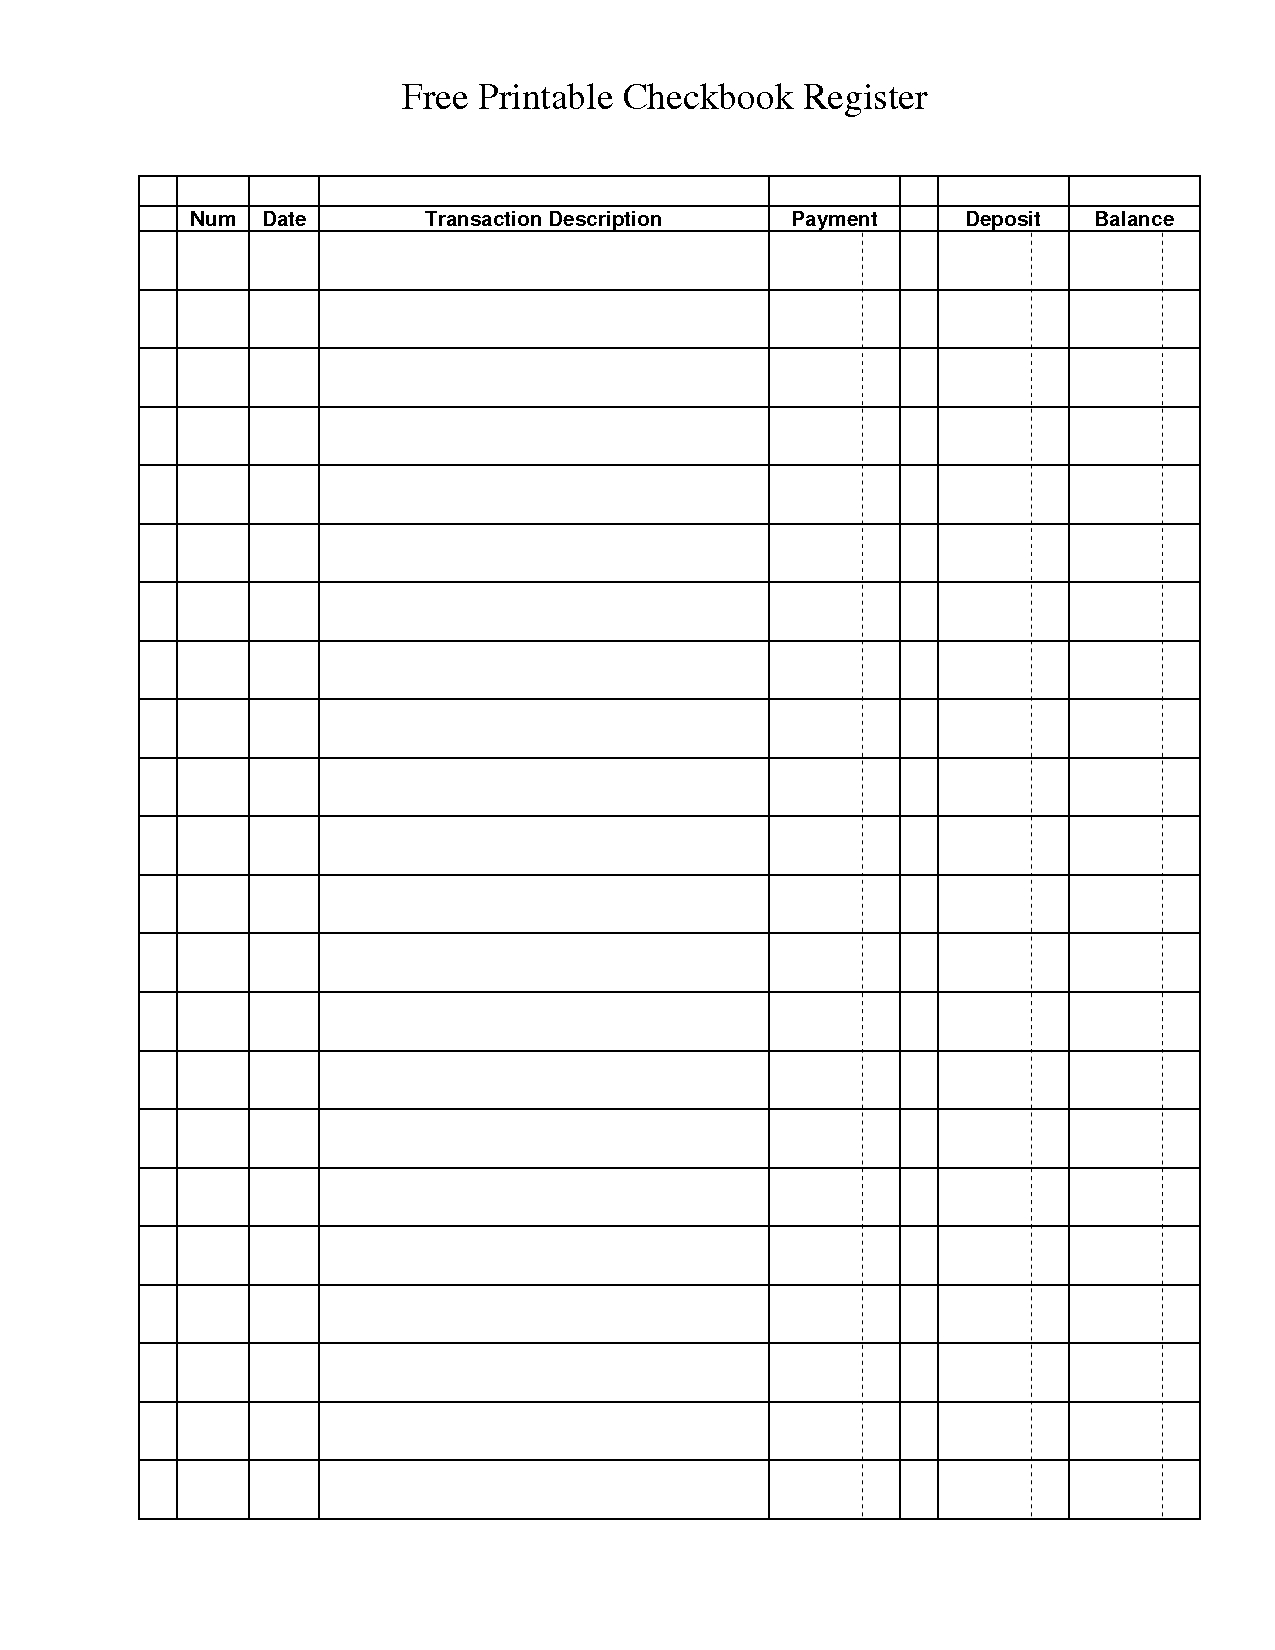 Free Printable Bookkeeping Sheets General Ledger Free Office Form Free Printable Ledger